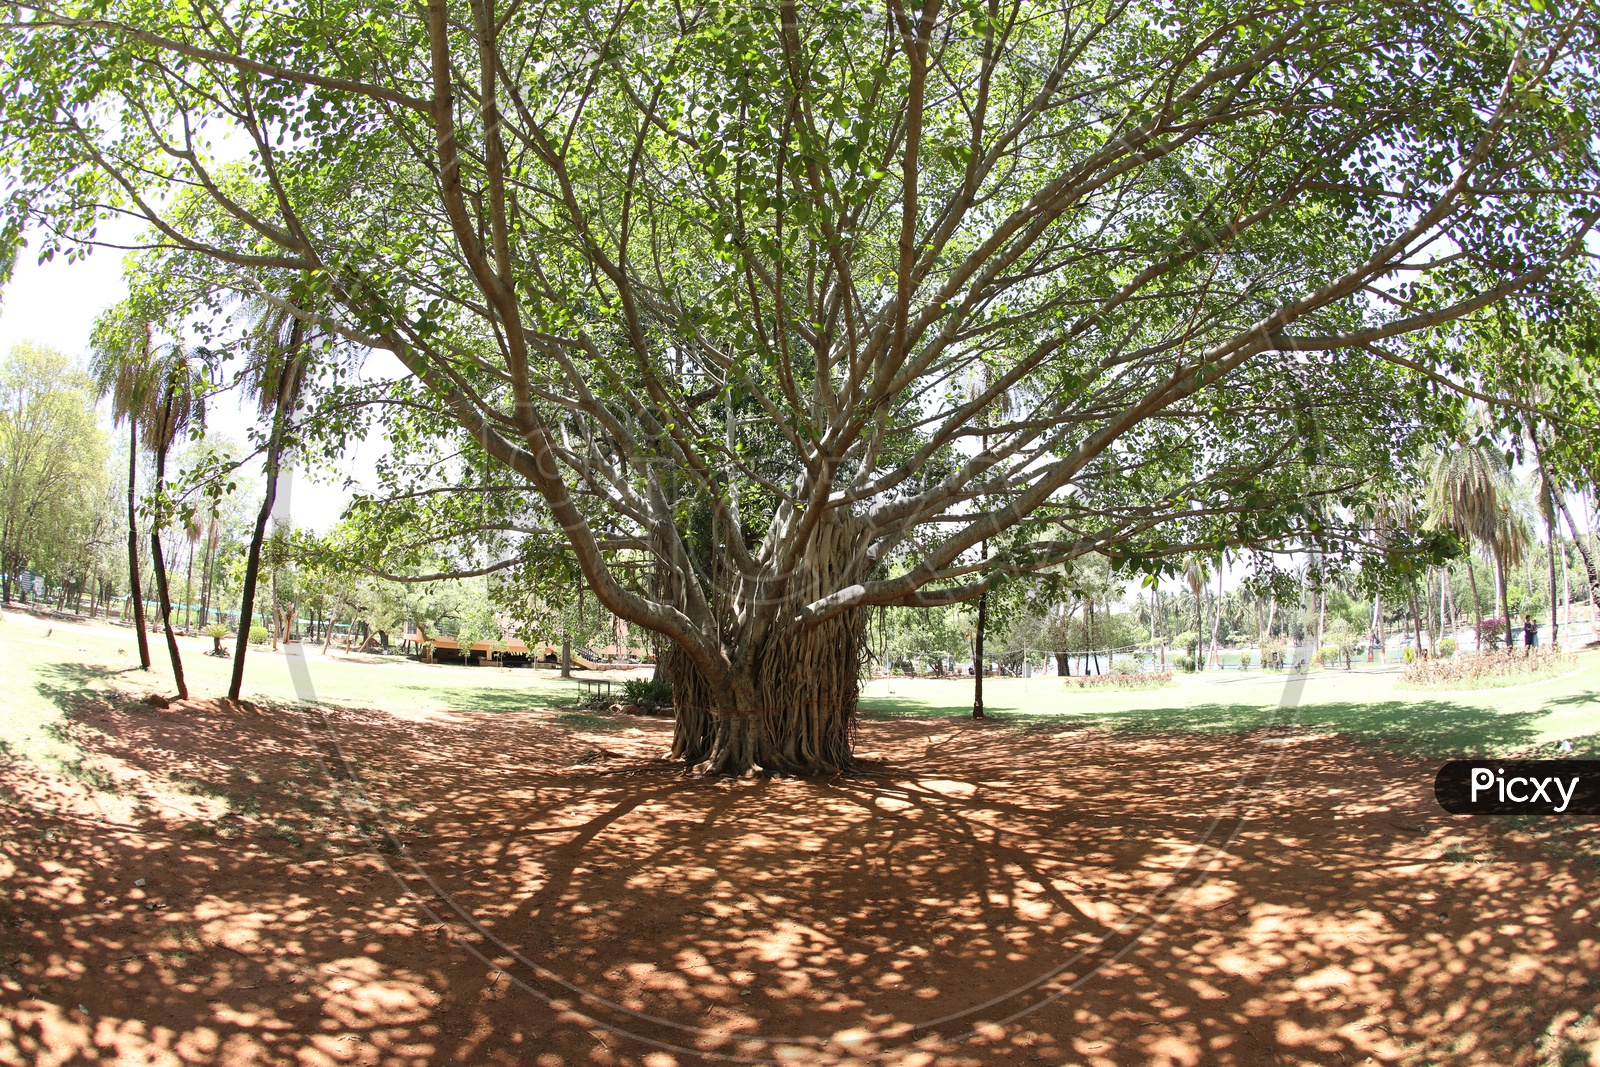 An Isolated Banyan Tree With Roots And Shadow of Banyan Tree in a Park